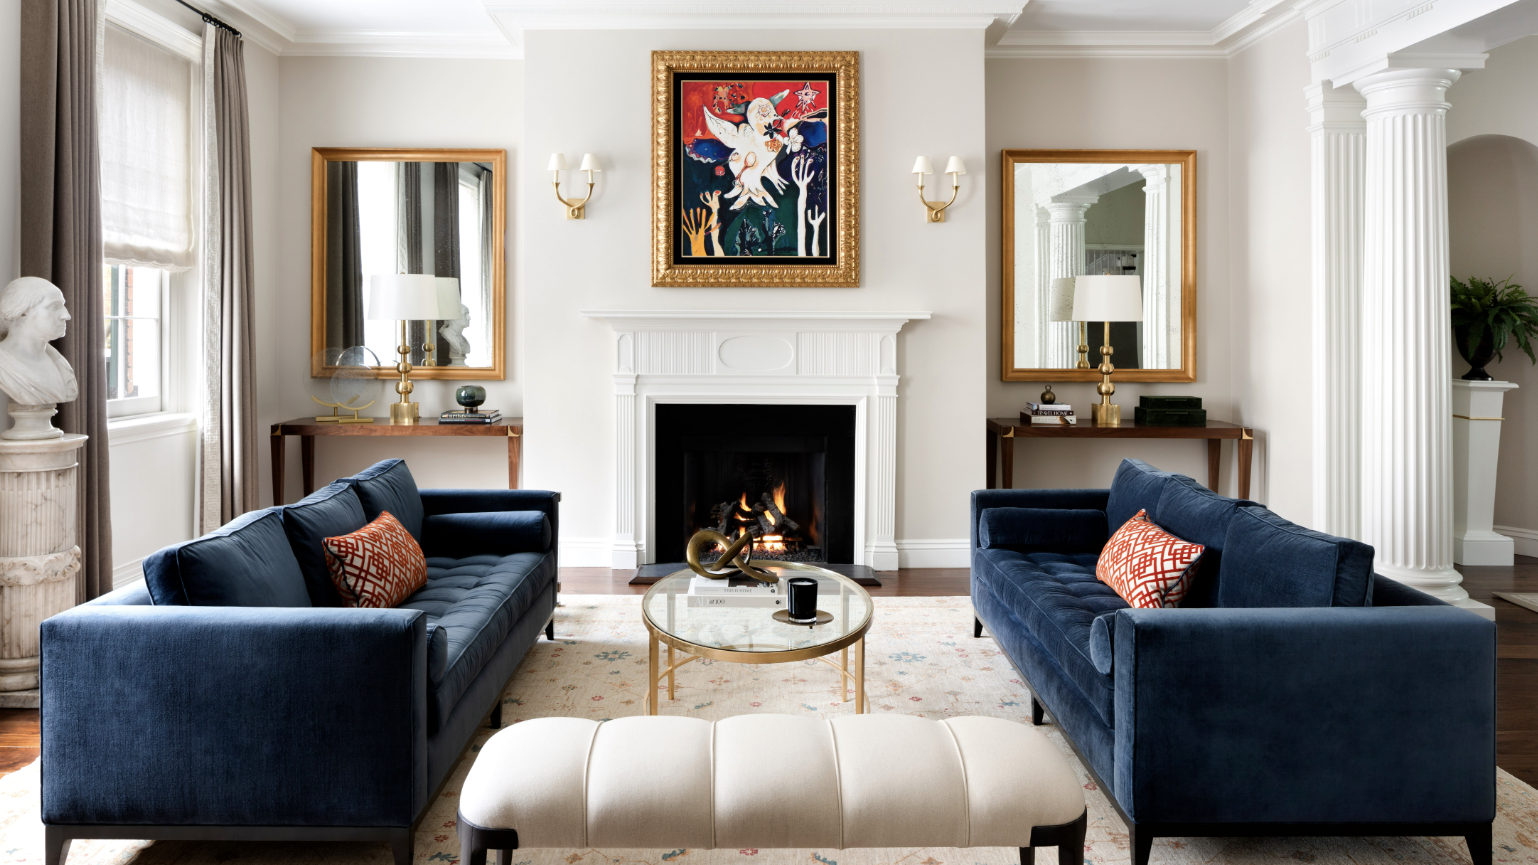 How an ELLE Decor Editor Styles Her Coffee Table